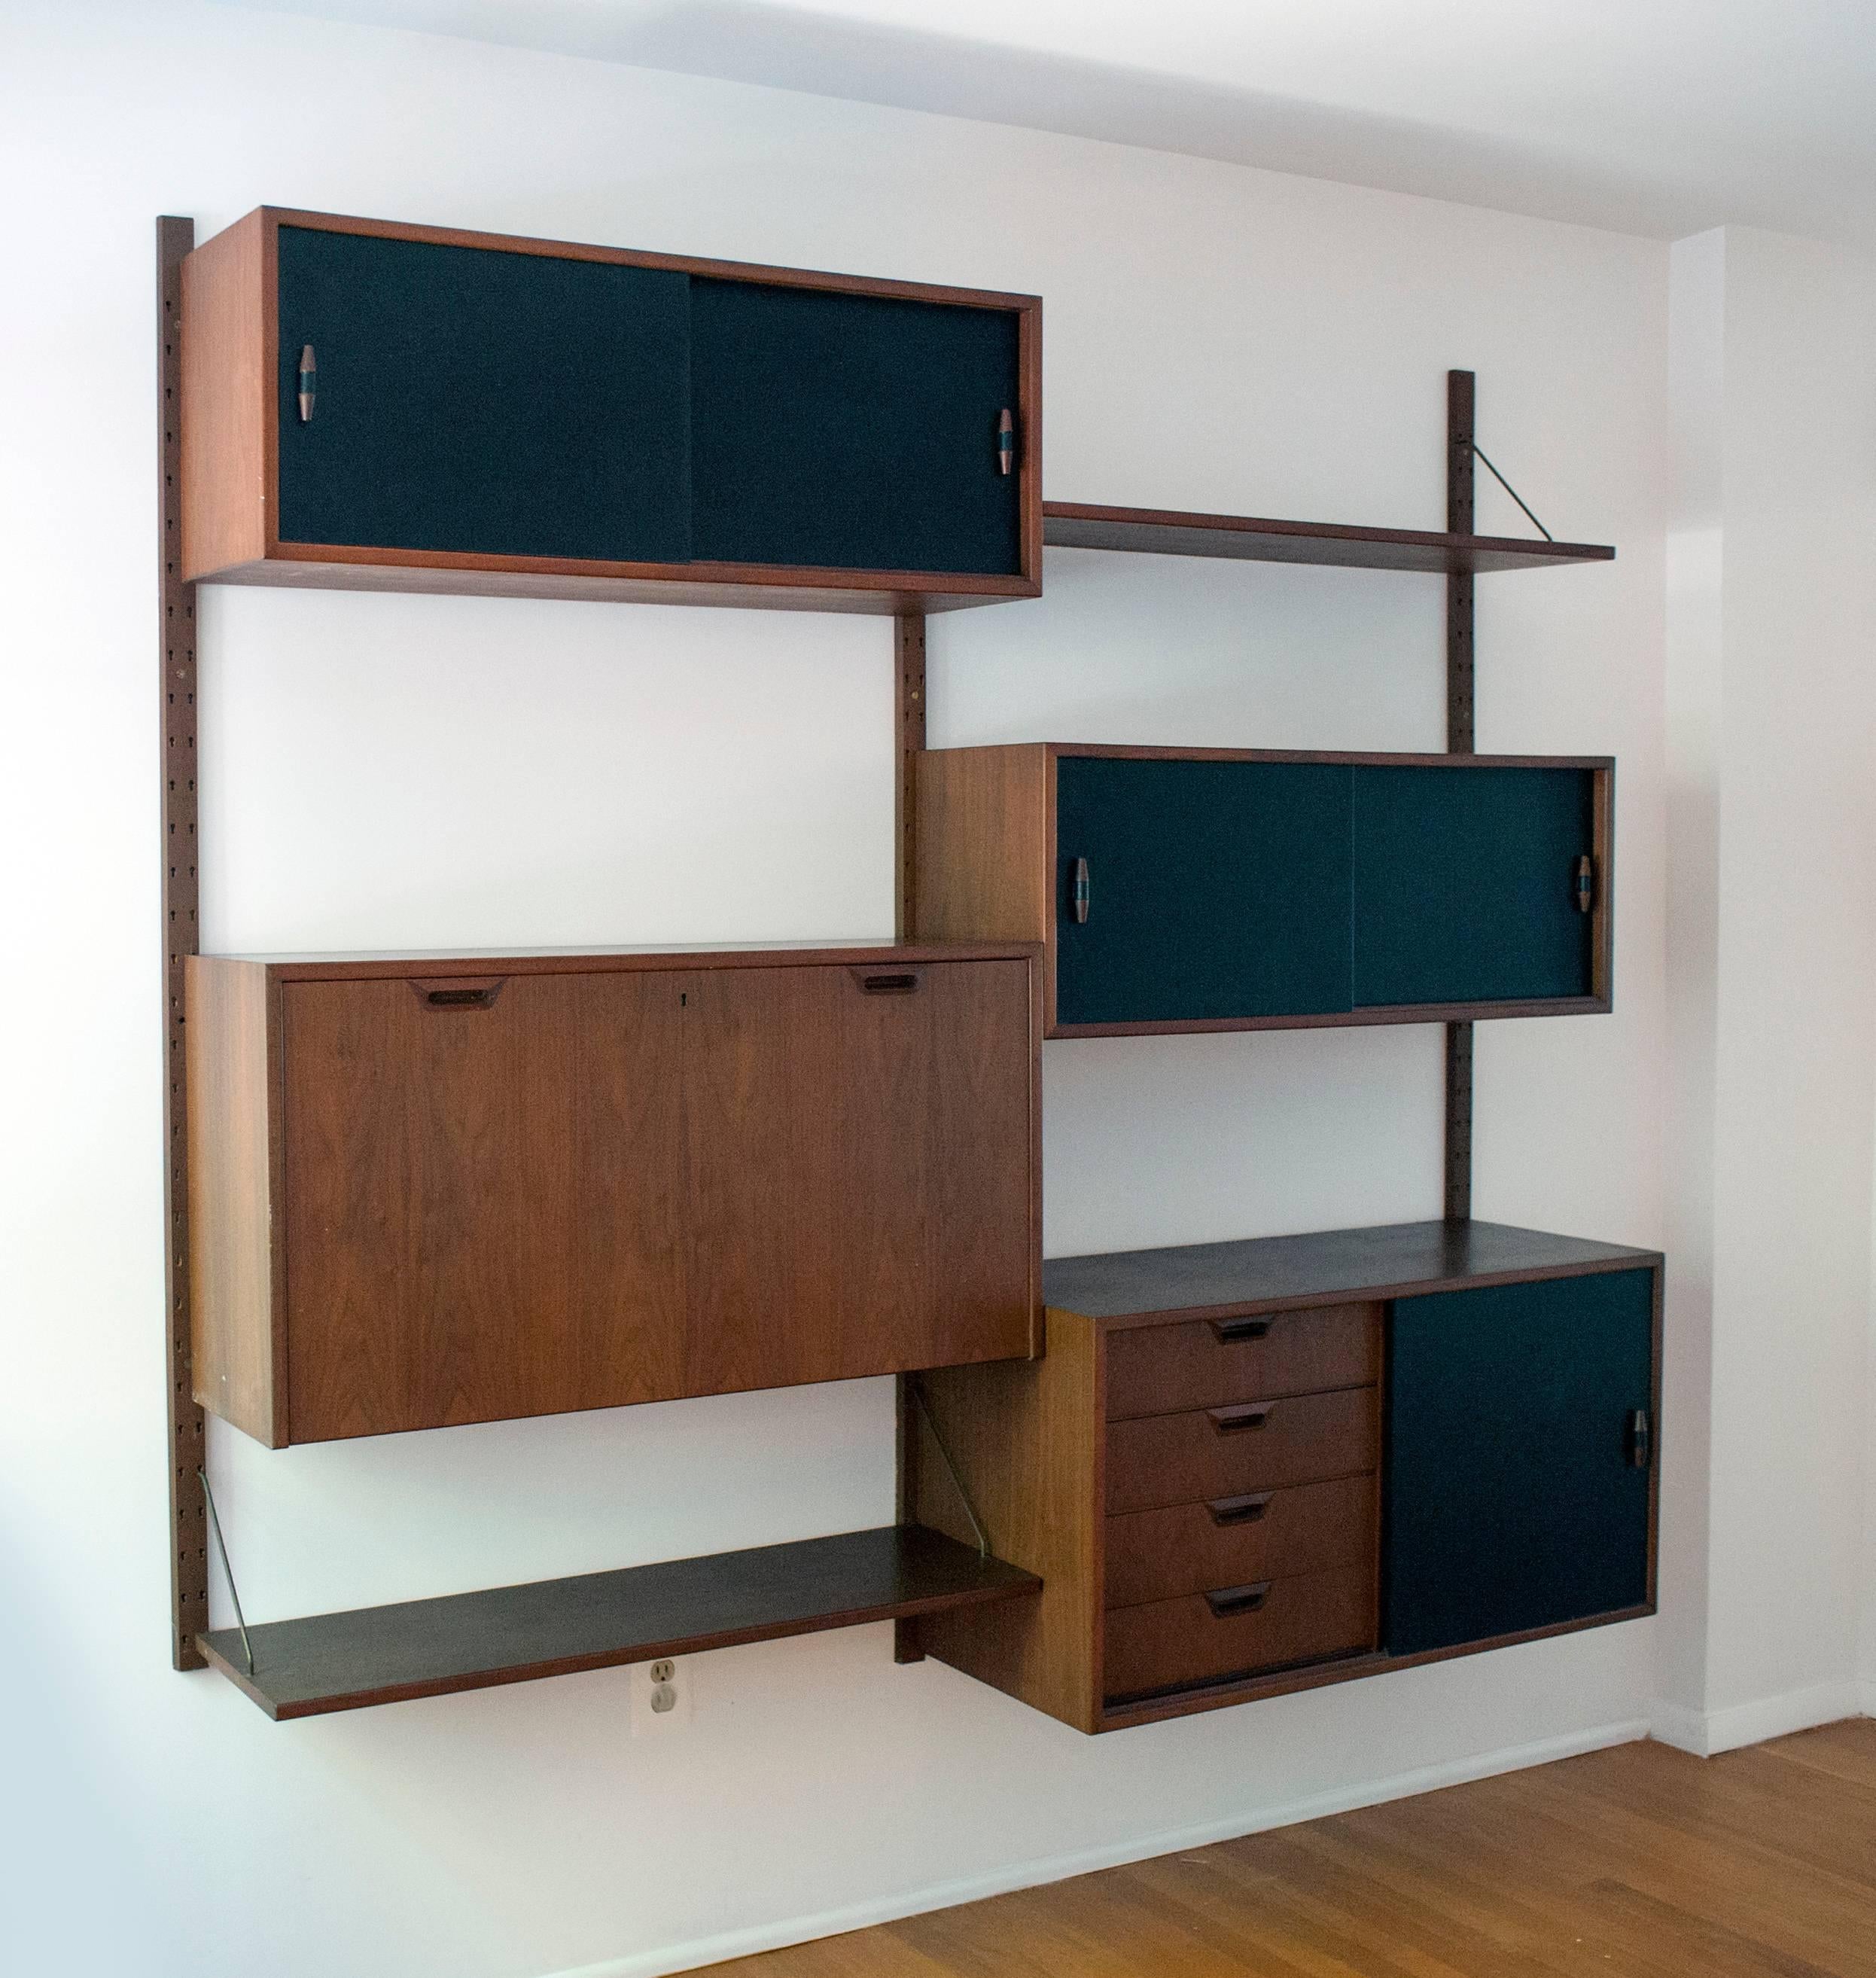 Rarely seen wall unit by Danish designer Sven Ellekaer. Retains the original black sliding doors and unusual pulls. Shelves are supported by solid brass supports. High quality construction throughout. Shelves come with original brass supports. Two